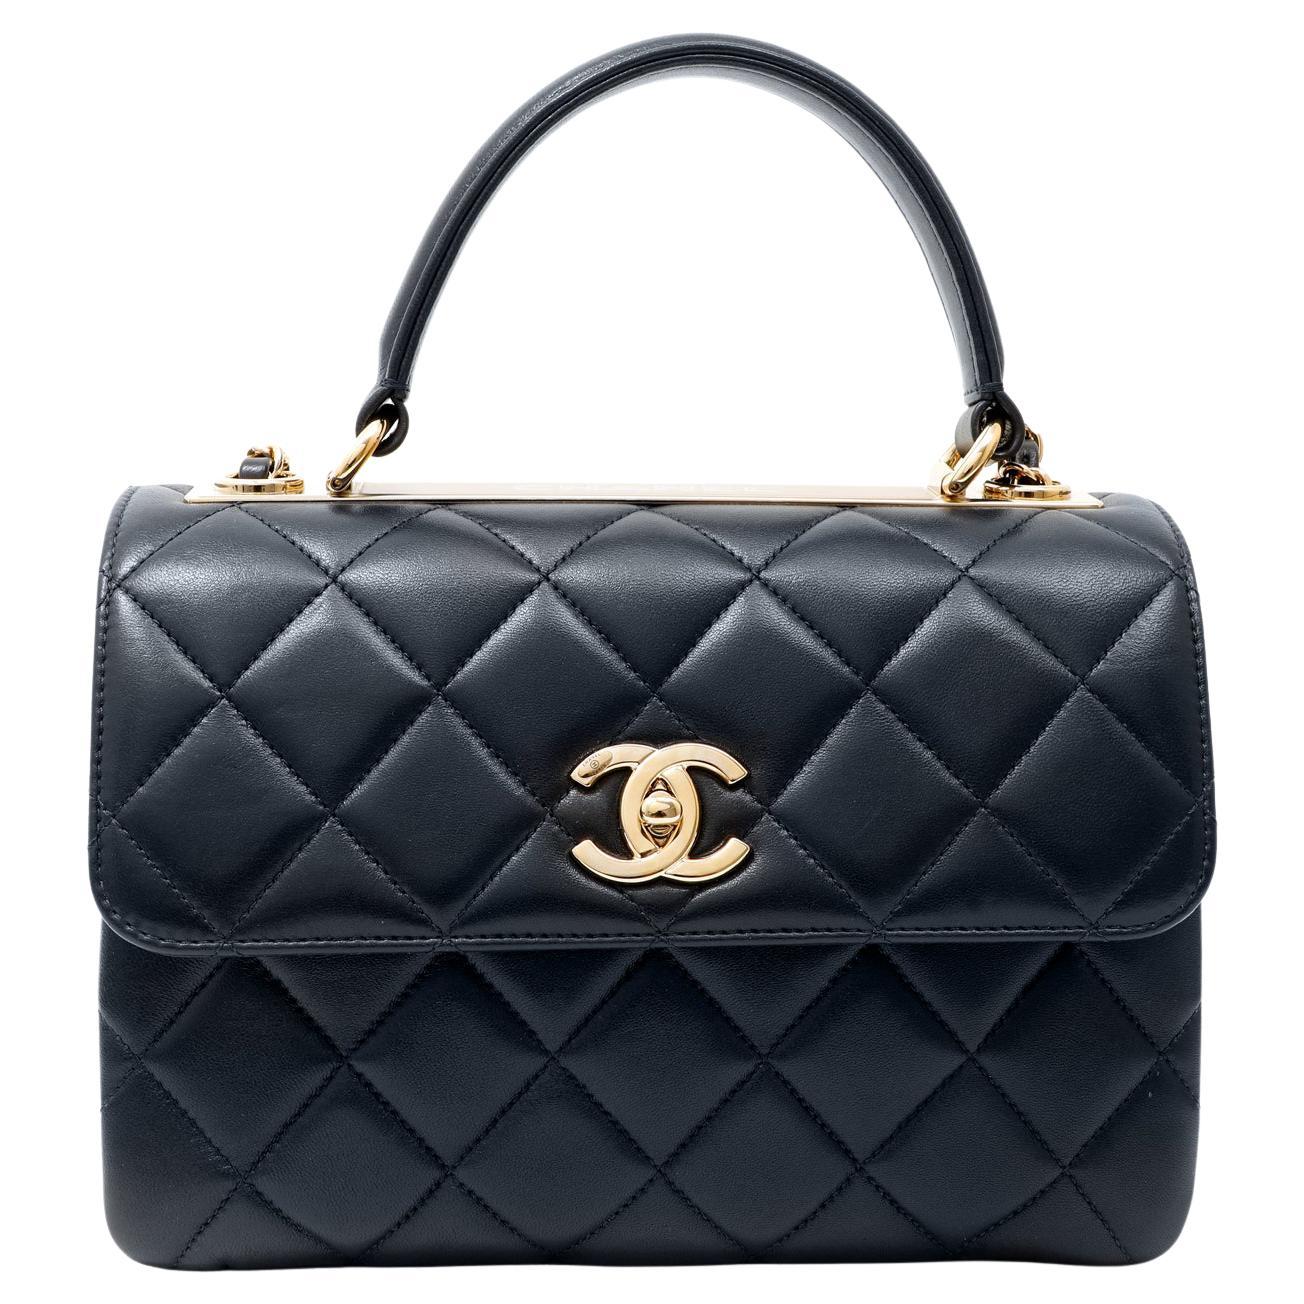 Chanel Navy Leather Top Handle Bag